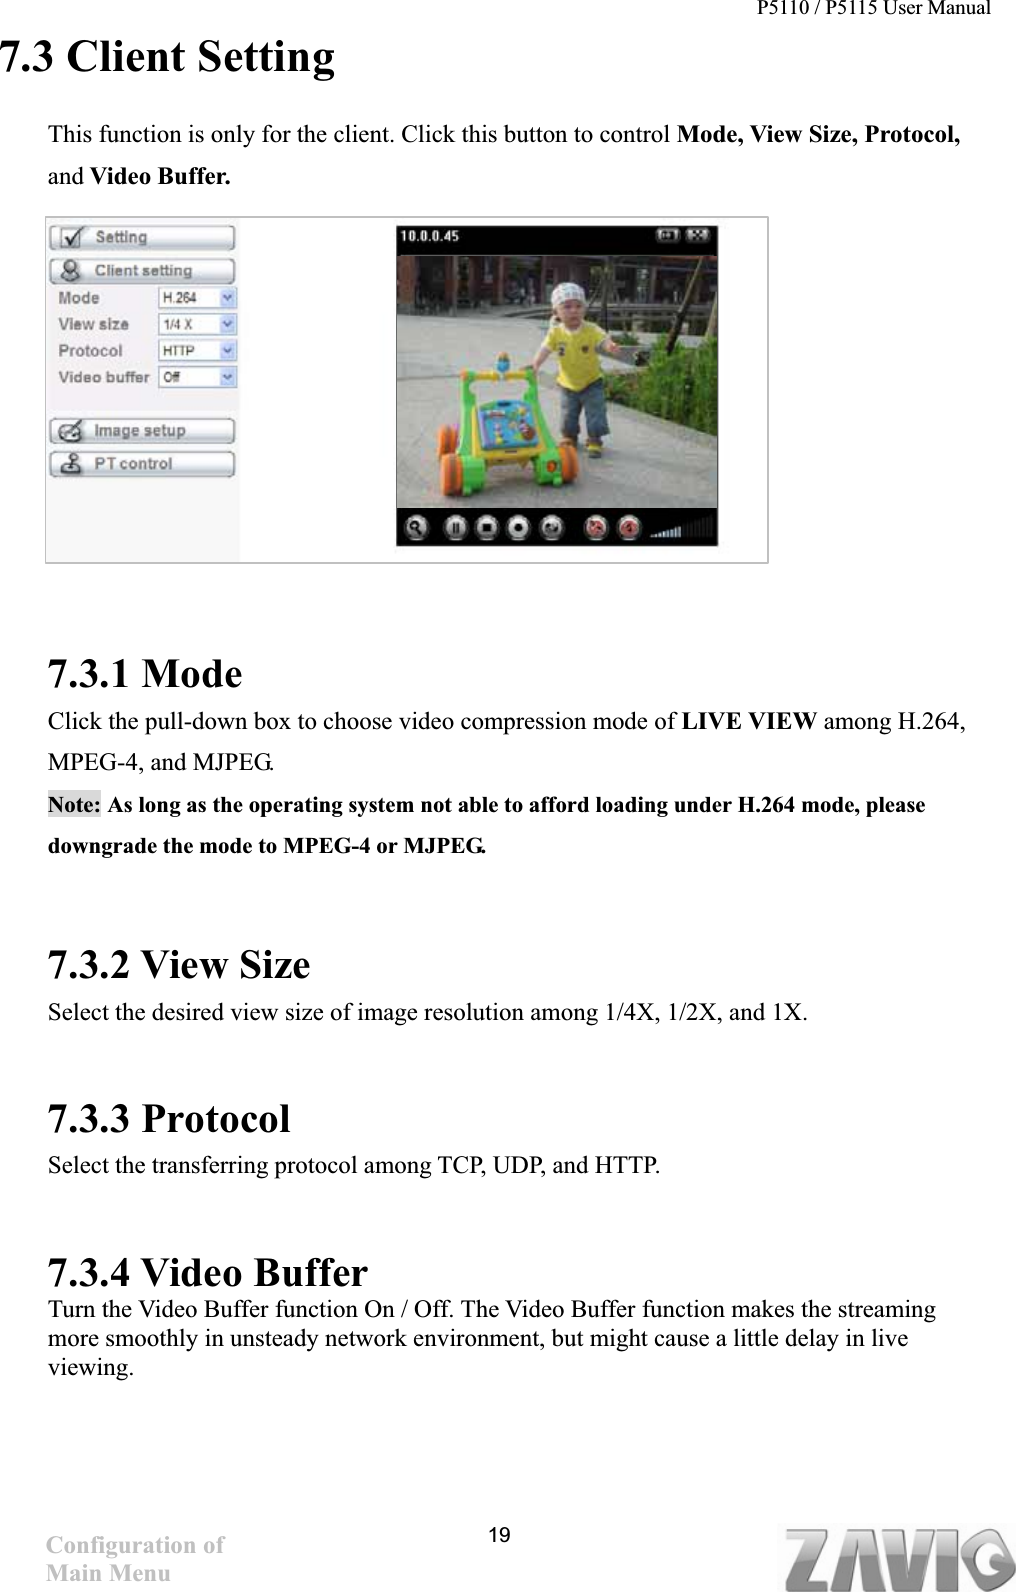 P5110 / P5115 User Manual   197.3 Client Setting This function is only for the client. Click this button to control Mode, View Size, Protocol, and Video Buffer. 7.3.1 Mode Click the pull-down box to choose video compression mode of LIVE VIEW among H.264, MPEG-4, and MJPEG.   Note: As long as the operating system not able to afford loading under H.264 mode, please downgrade the mode to MPEG-4 or MJPEG.     7.3.2 View Size Select the desired view size of image resolution among 1/4X, 1/2X, and 1X. 7.3.3 Protocol Select the transferring protocol among TCP, UDP, and HTTP.     7.3.4 Video Buffer   Turn the Video Buffer function On / Off. The Video Buffer function makes the streaming more smoothly in unsteady network environment, but might cause a little delay in live viewing.Configuration of Main Menu 